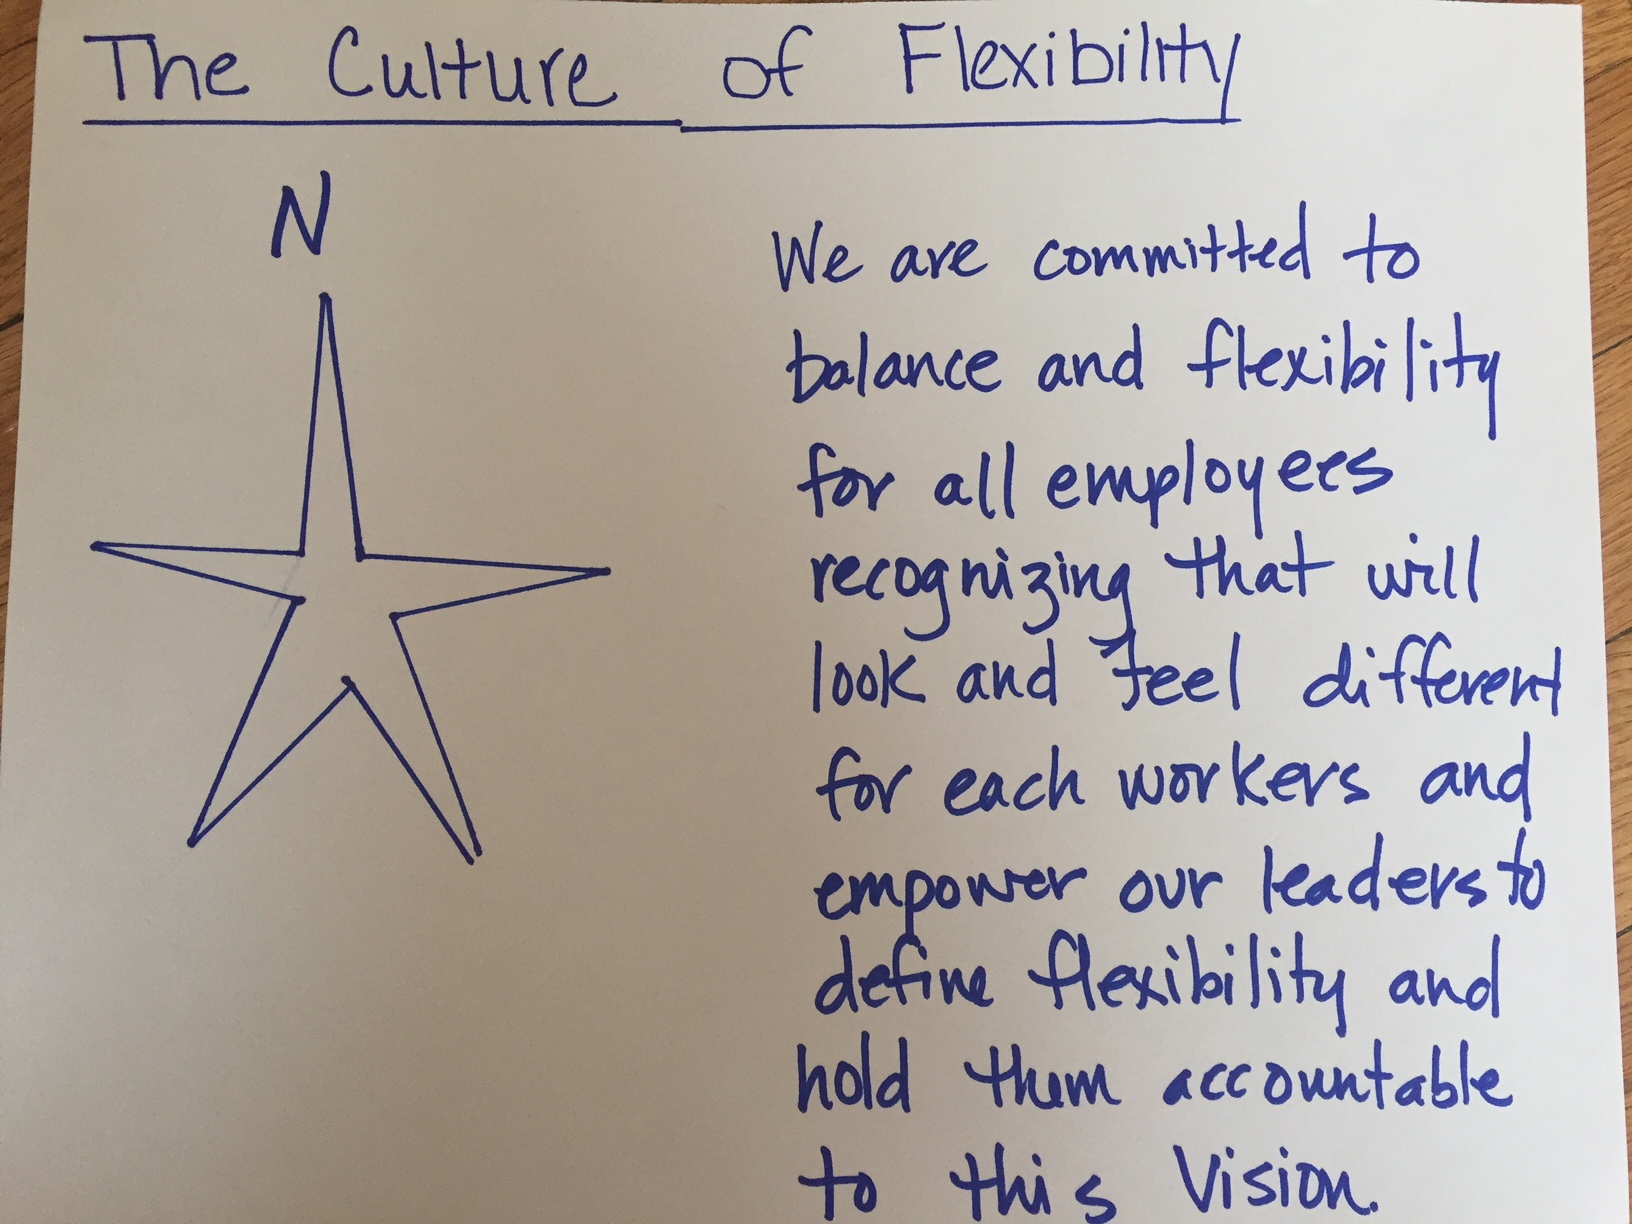 The Culture of Flexibility